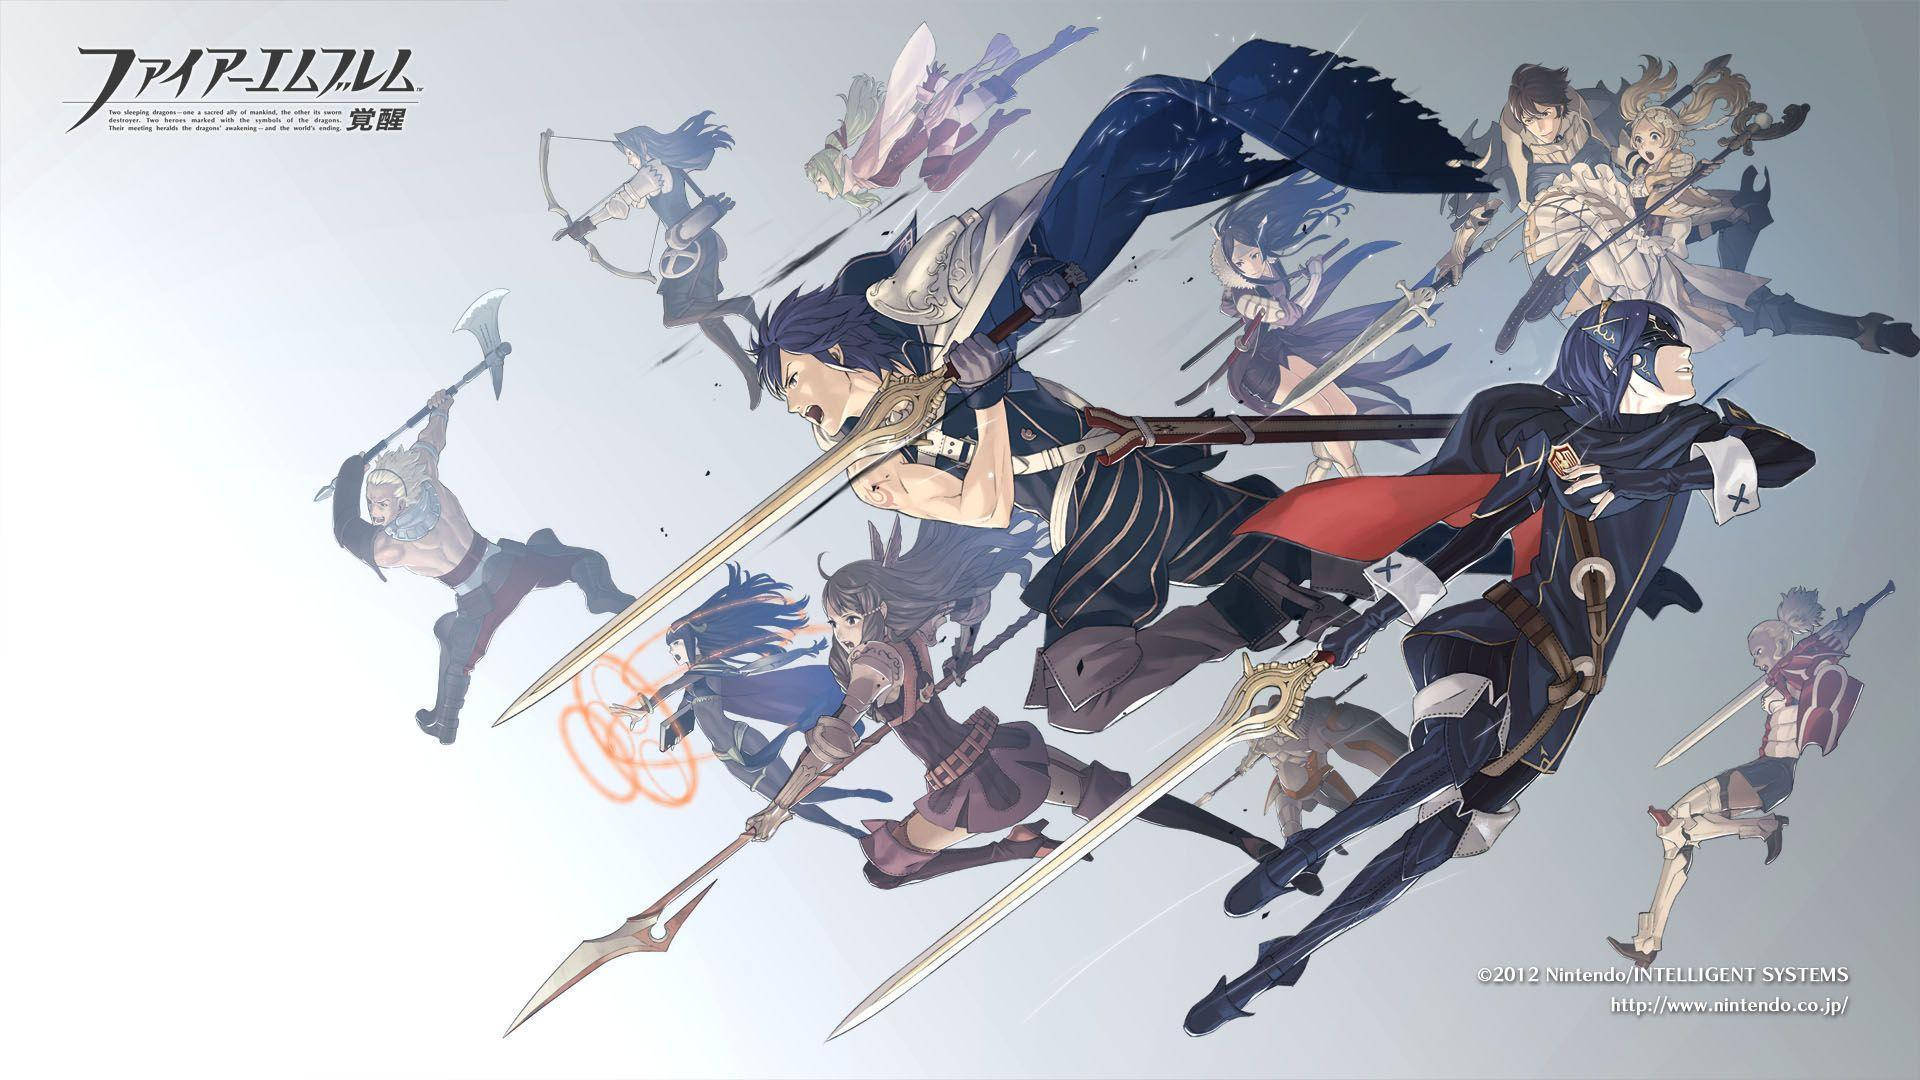 Outwit your opponents in Fire Emblem: Three Houses Wallpaper